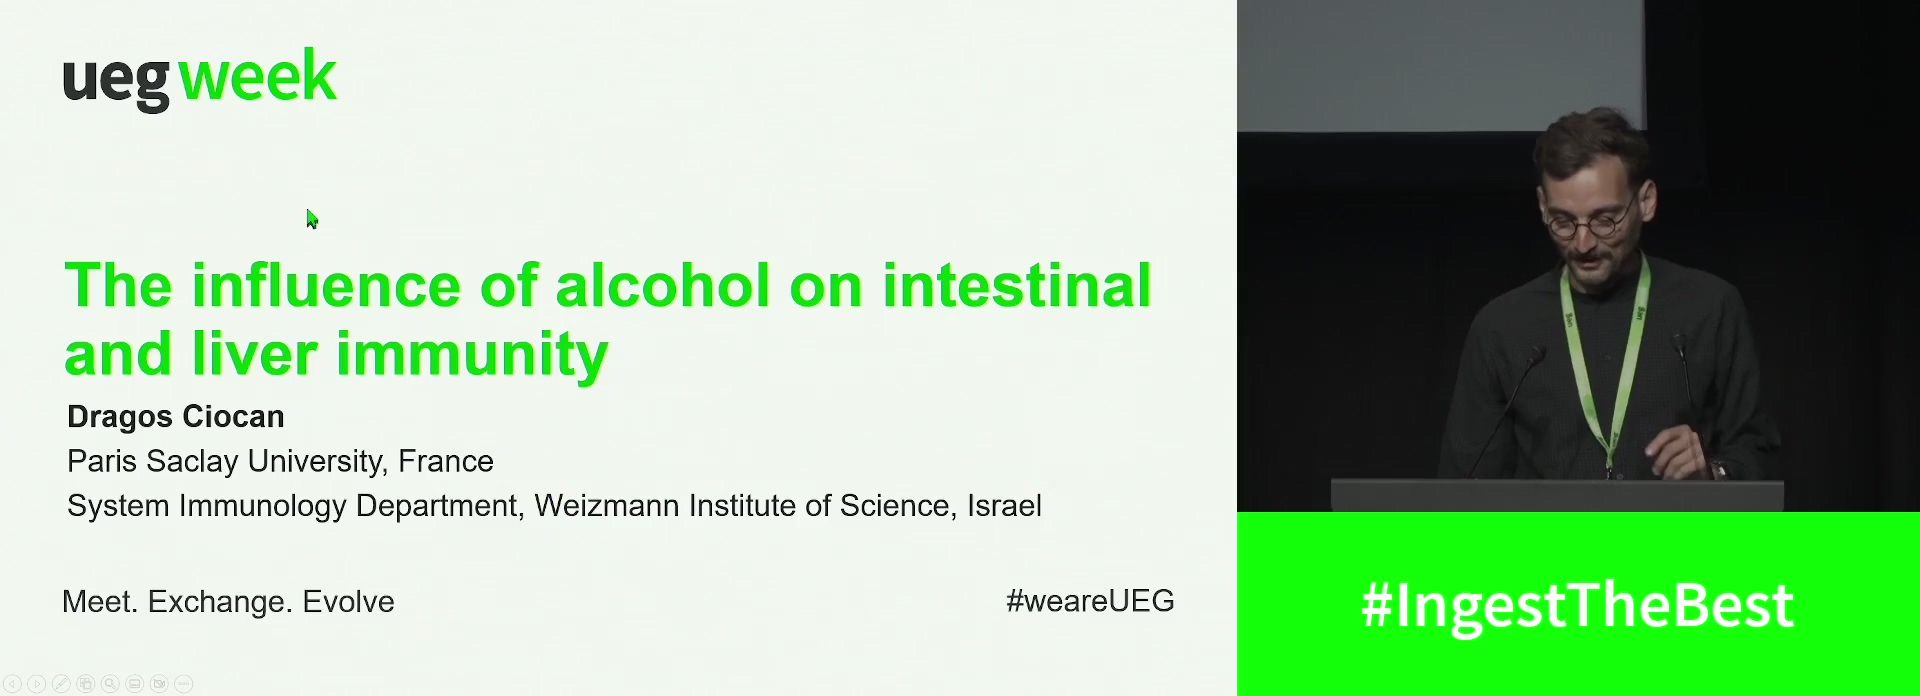 The influence of alcohol on intestinal and liver immunity